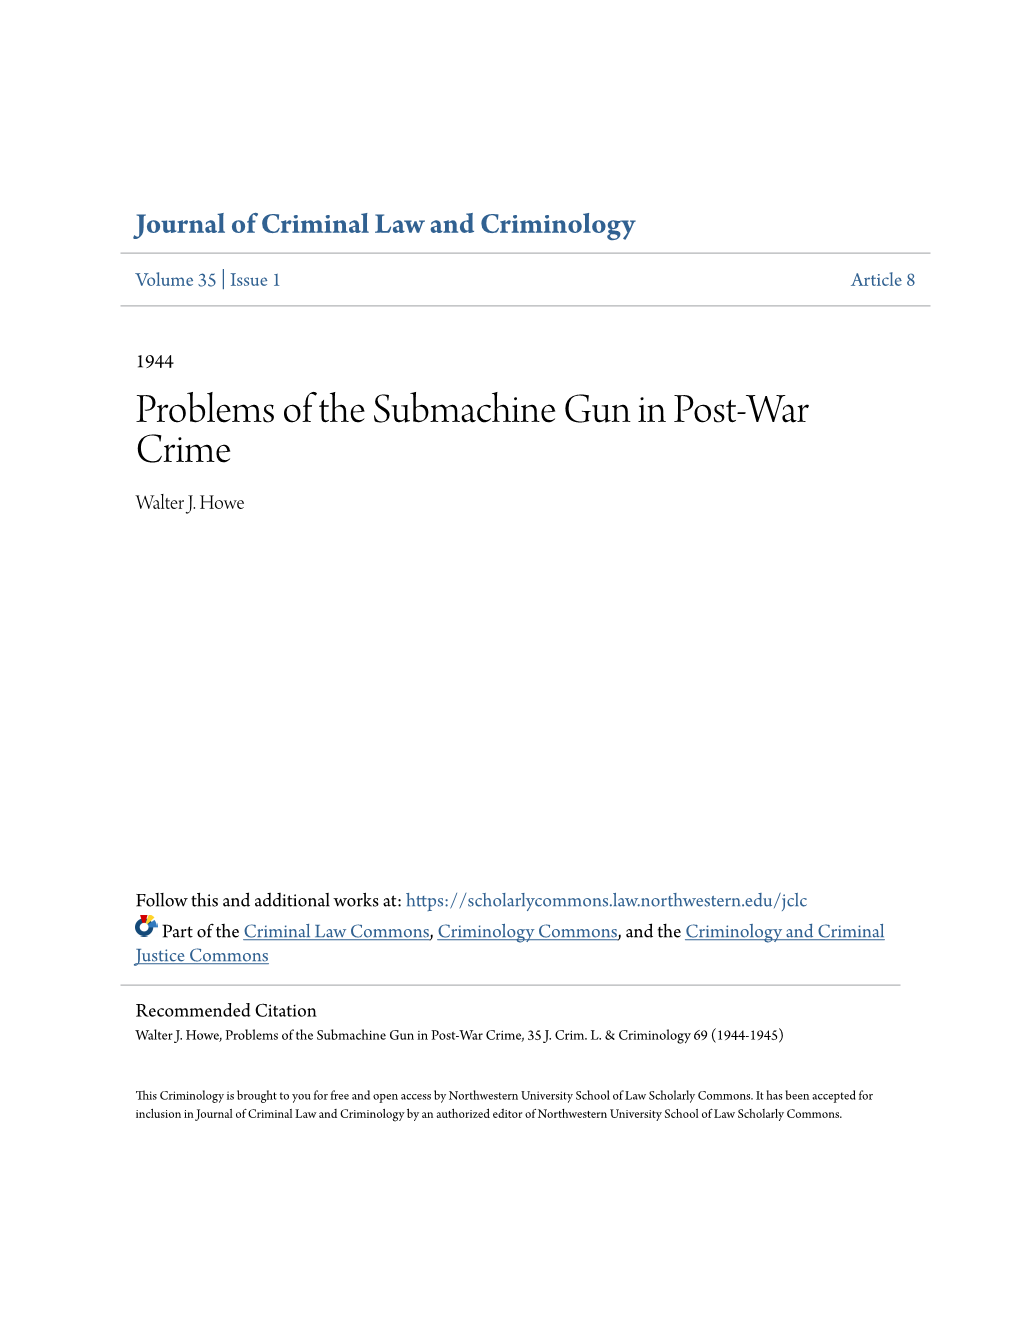 Problems of the Submachine Gun in Post-War Crime Walter J